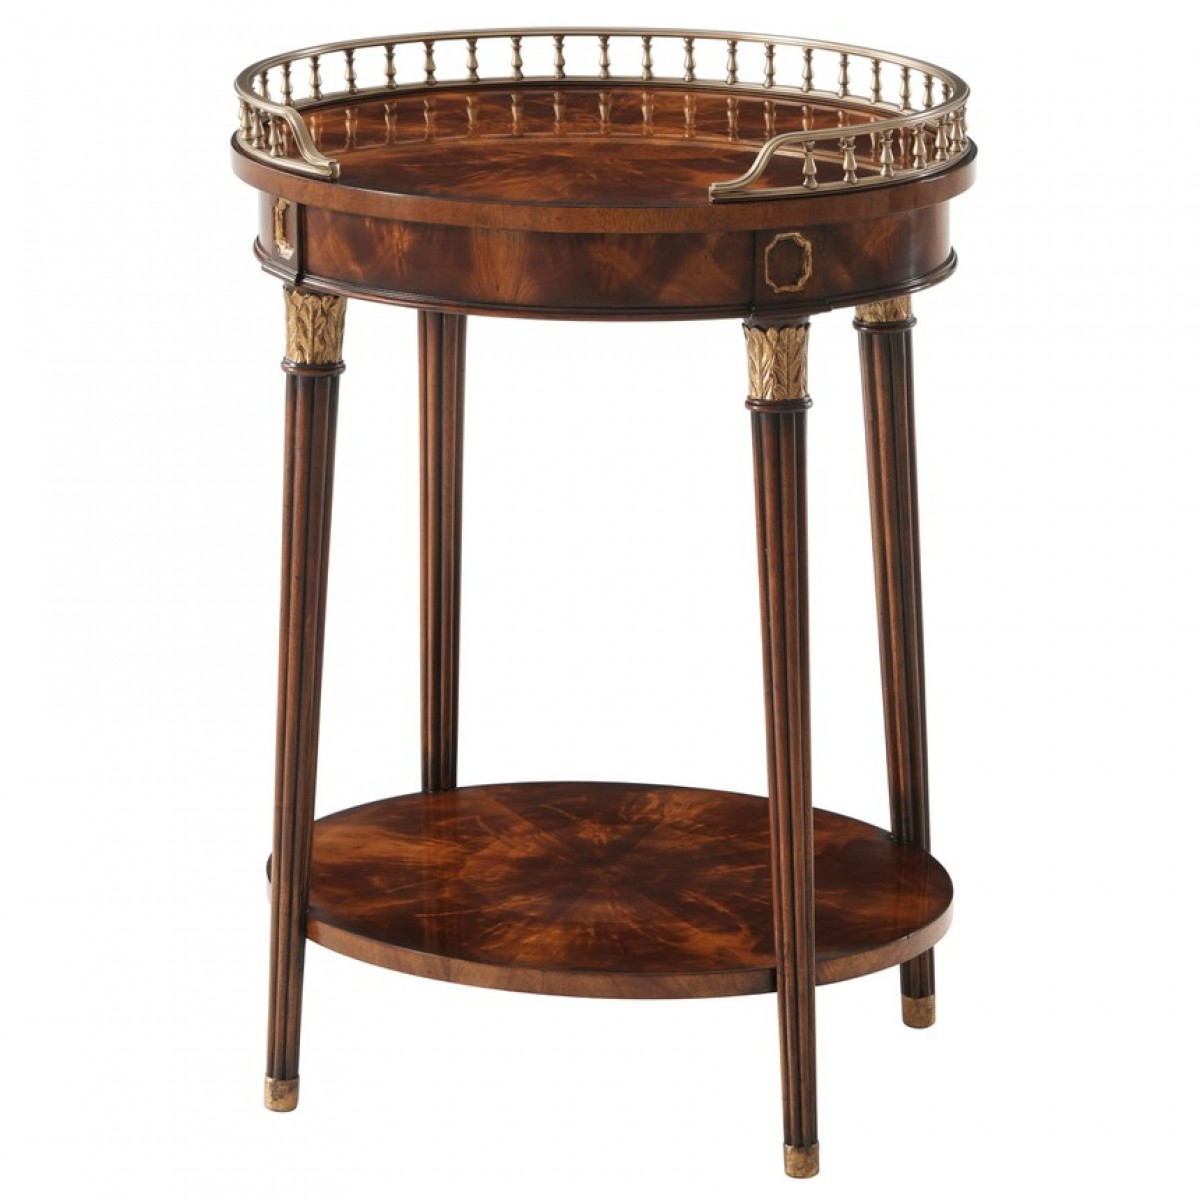 Frederick's Accent Table | Highlight image